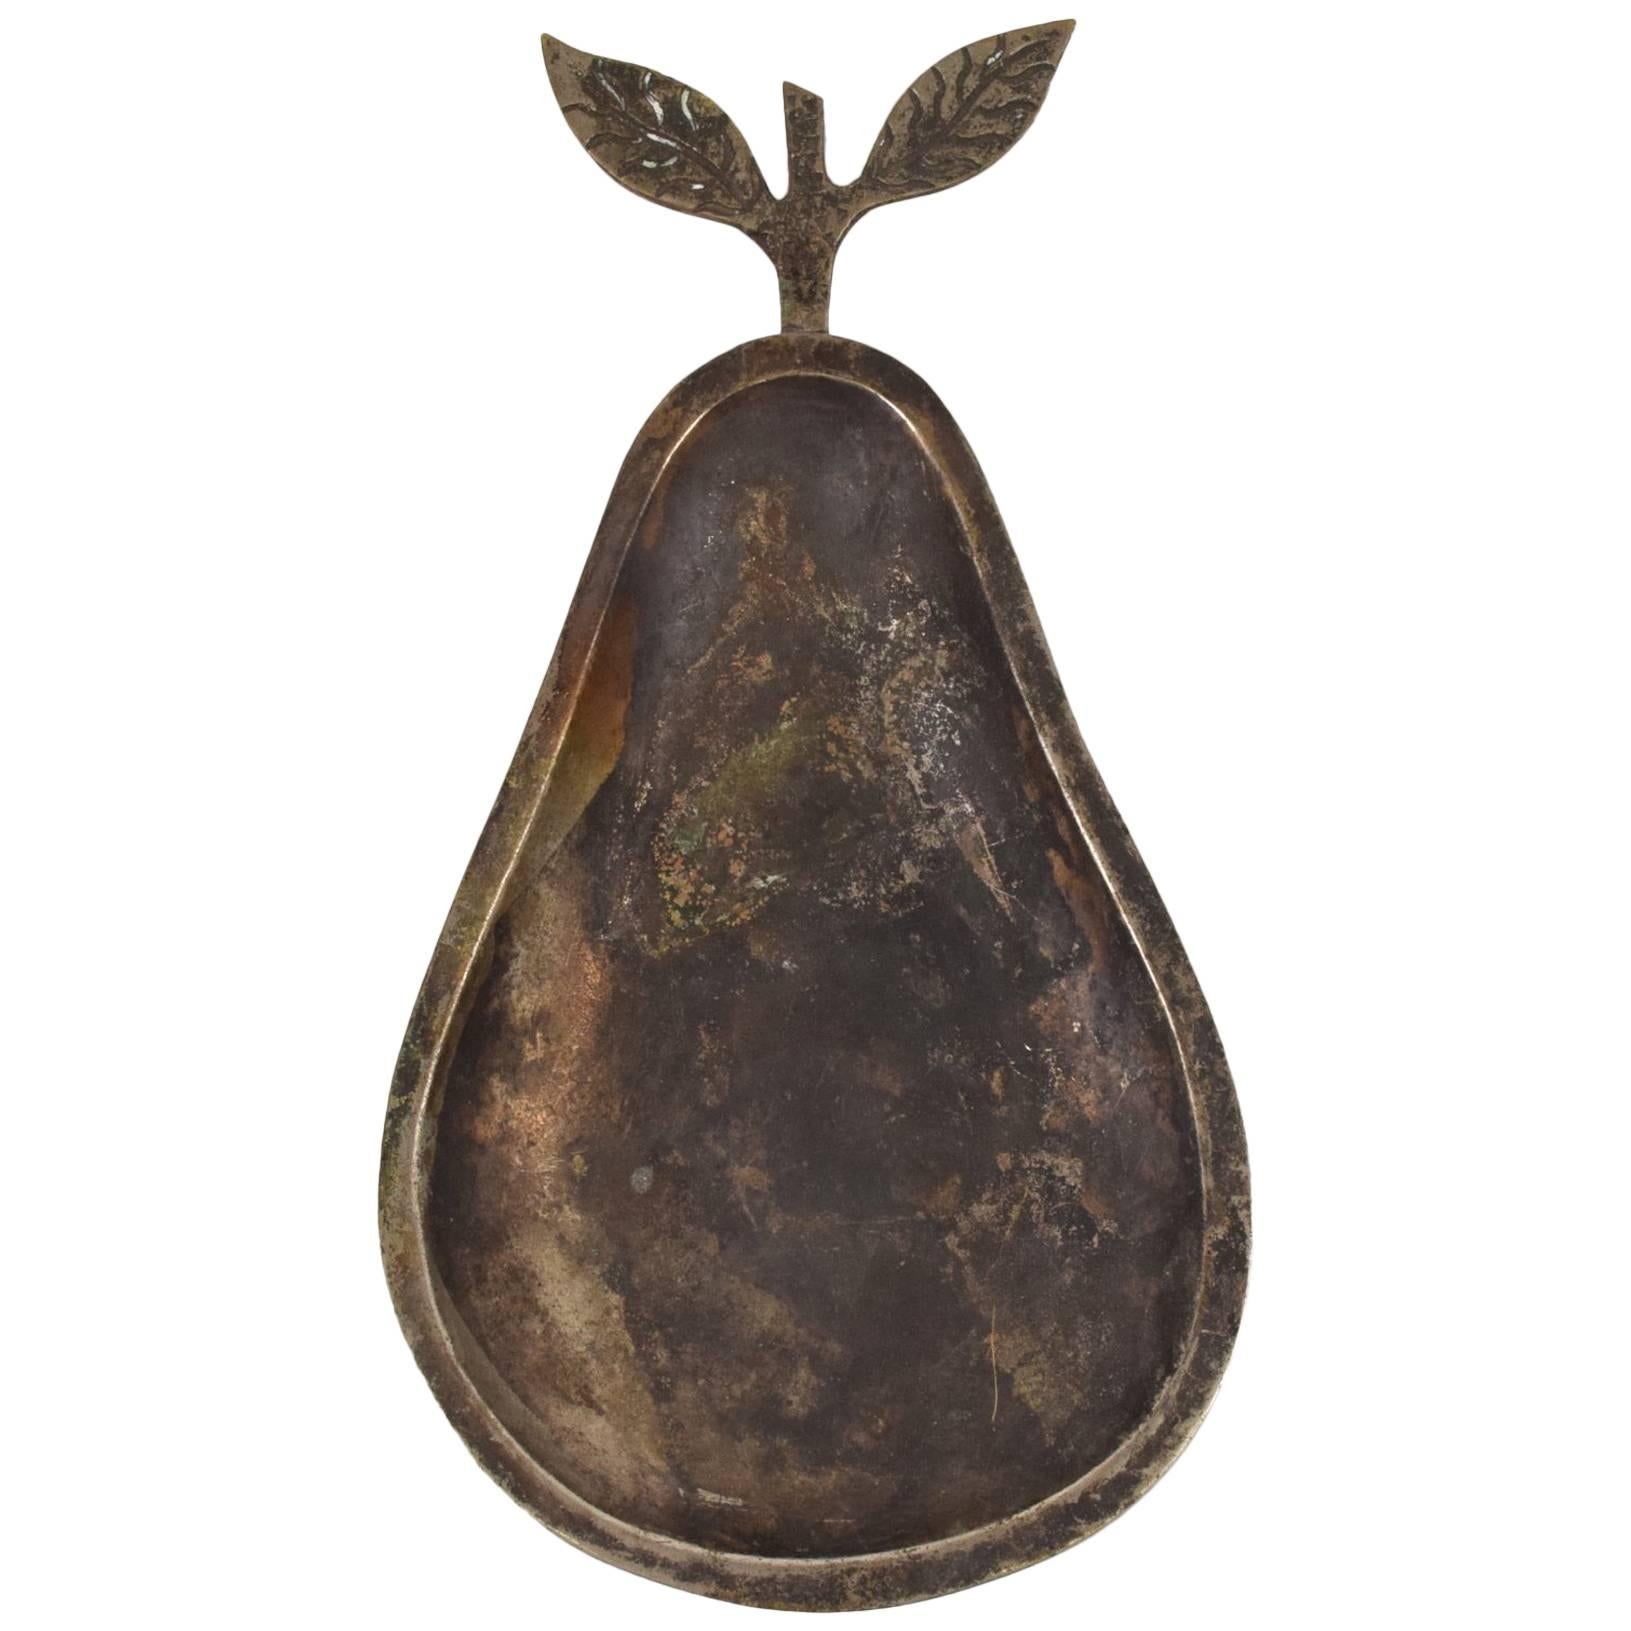 Midcentury Mexican Dish Pear Shade, Silver Plated, 1960s